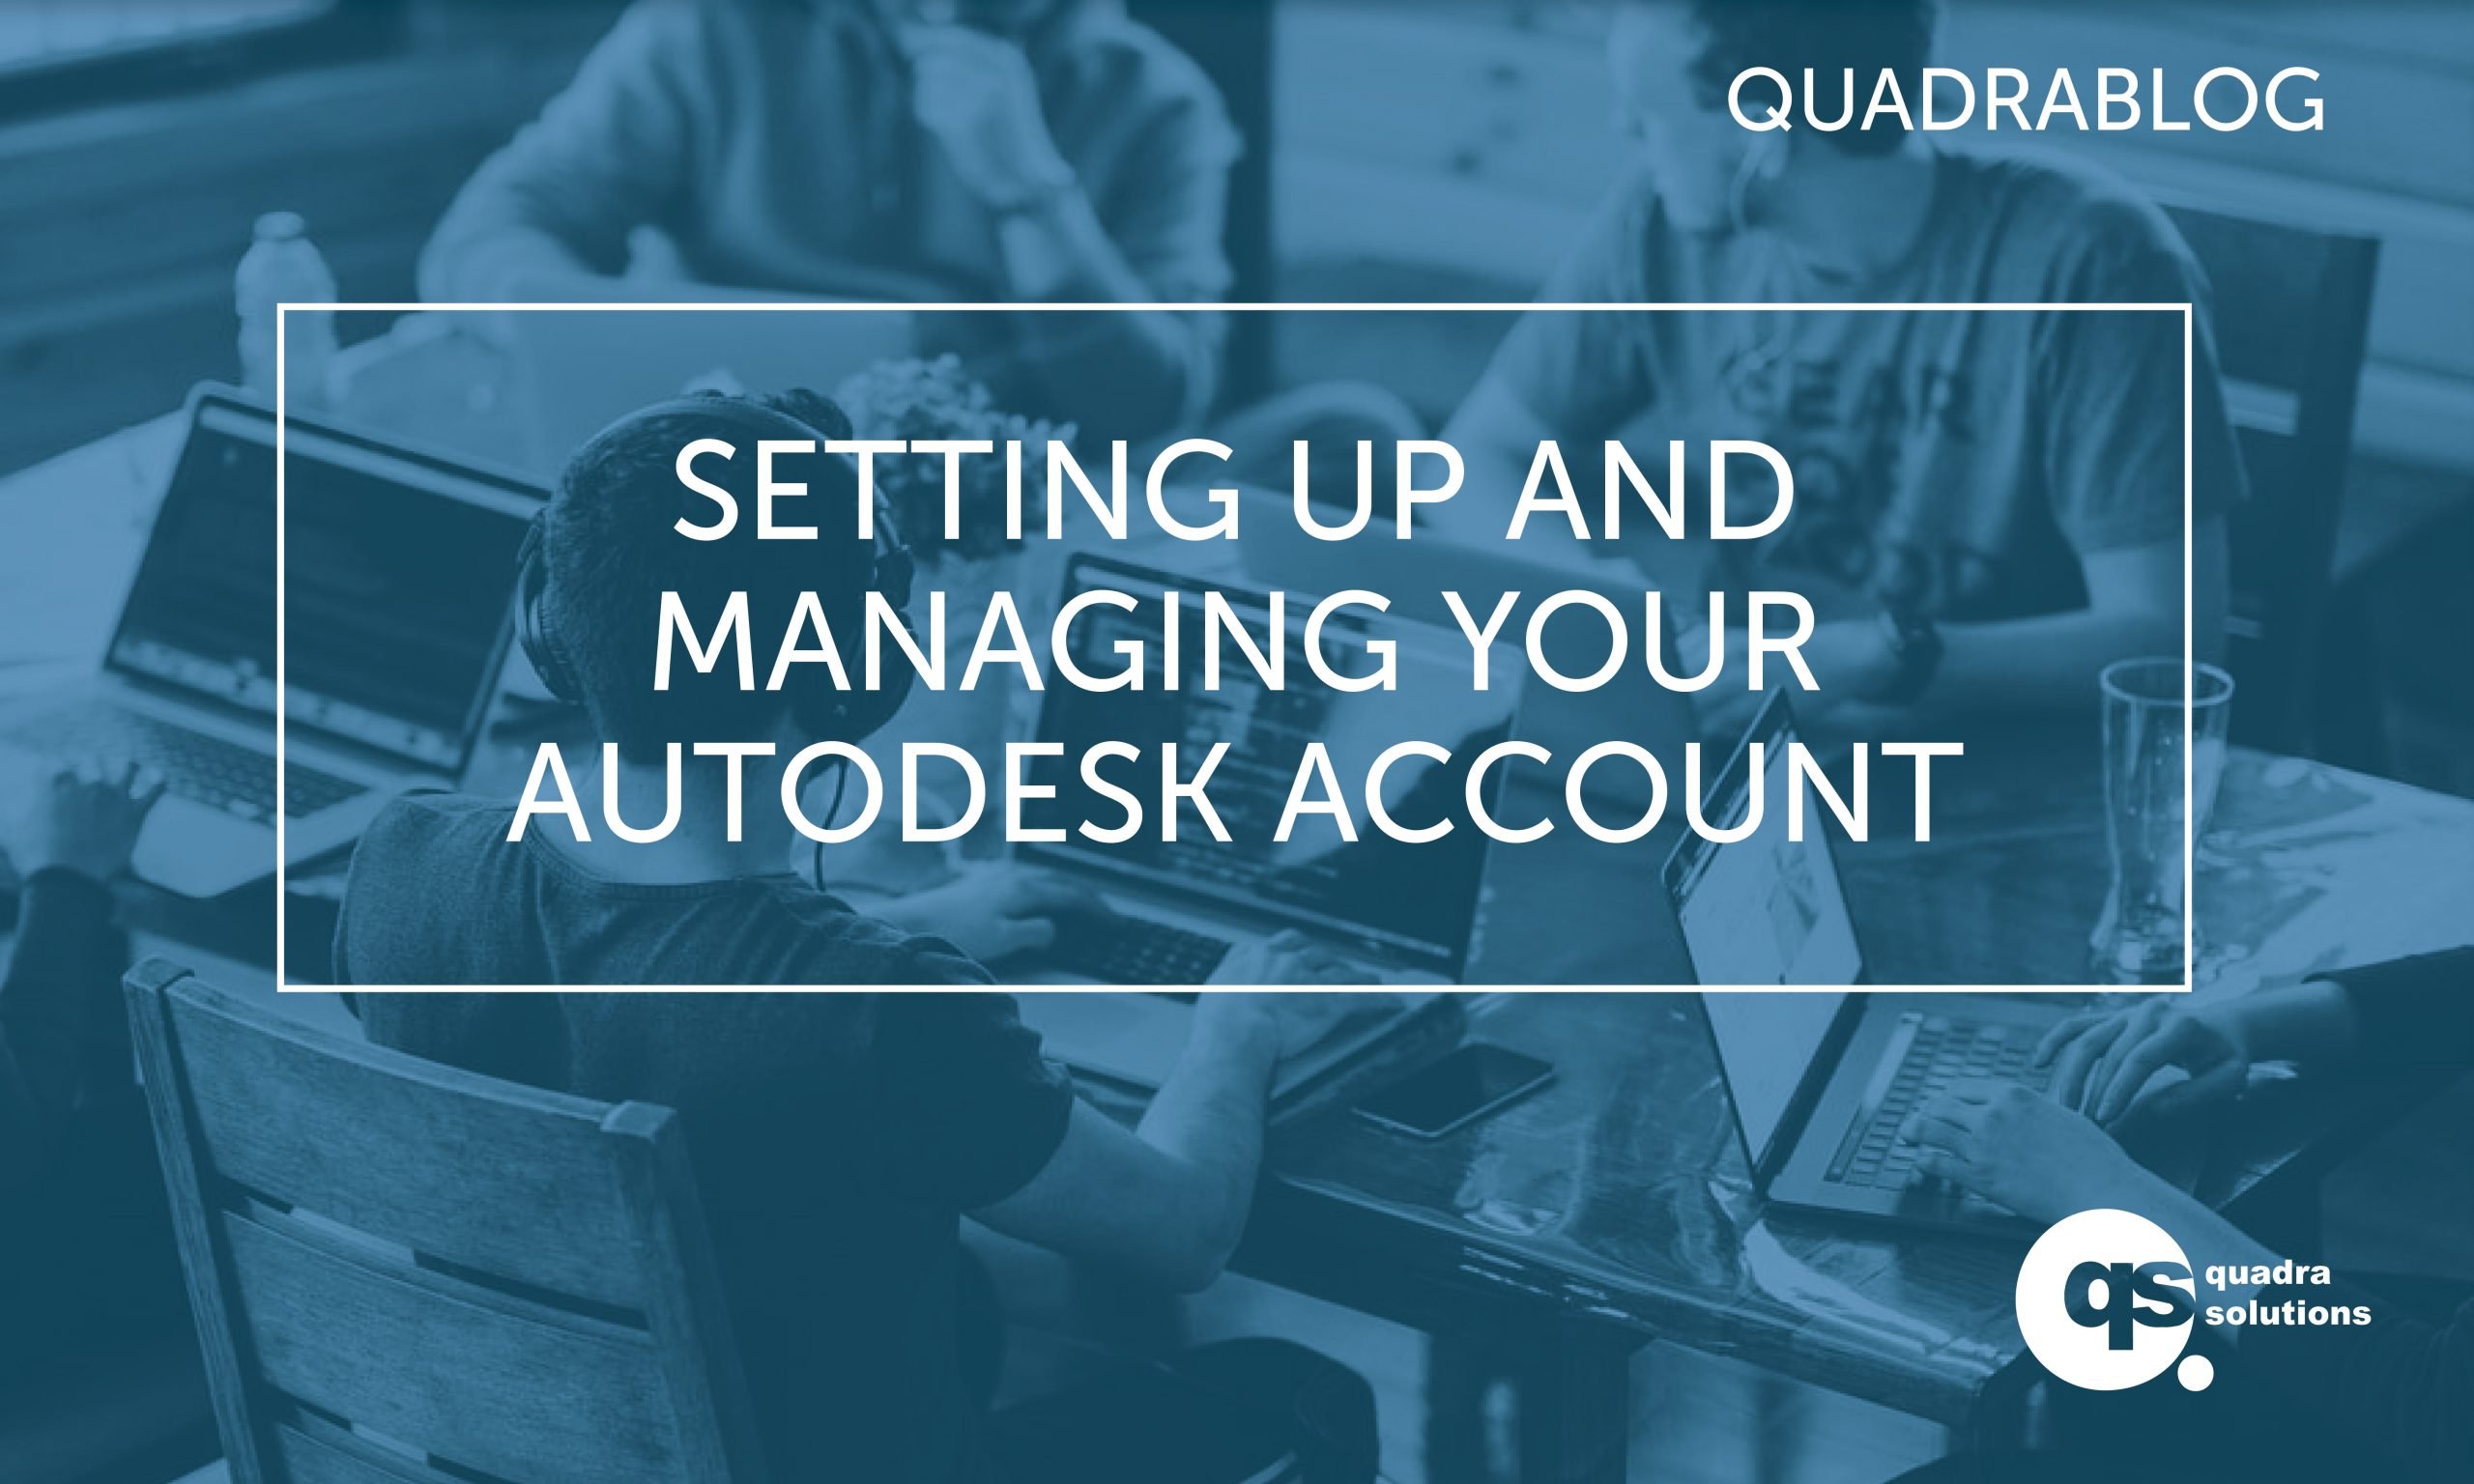 Need Help Setting Up and Managing your Autodesk Account?